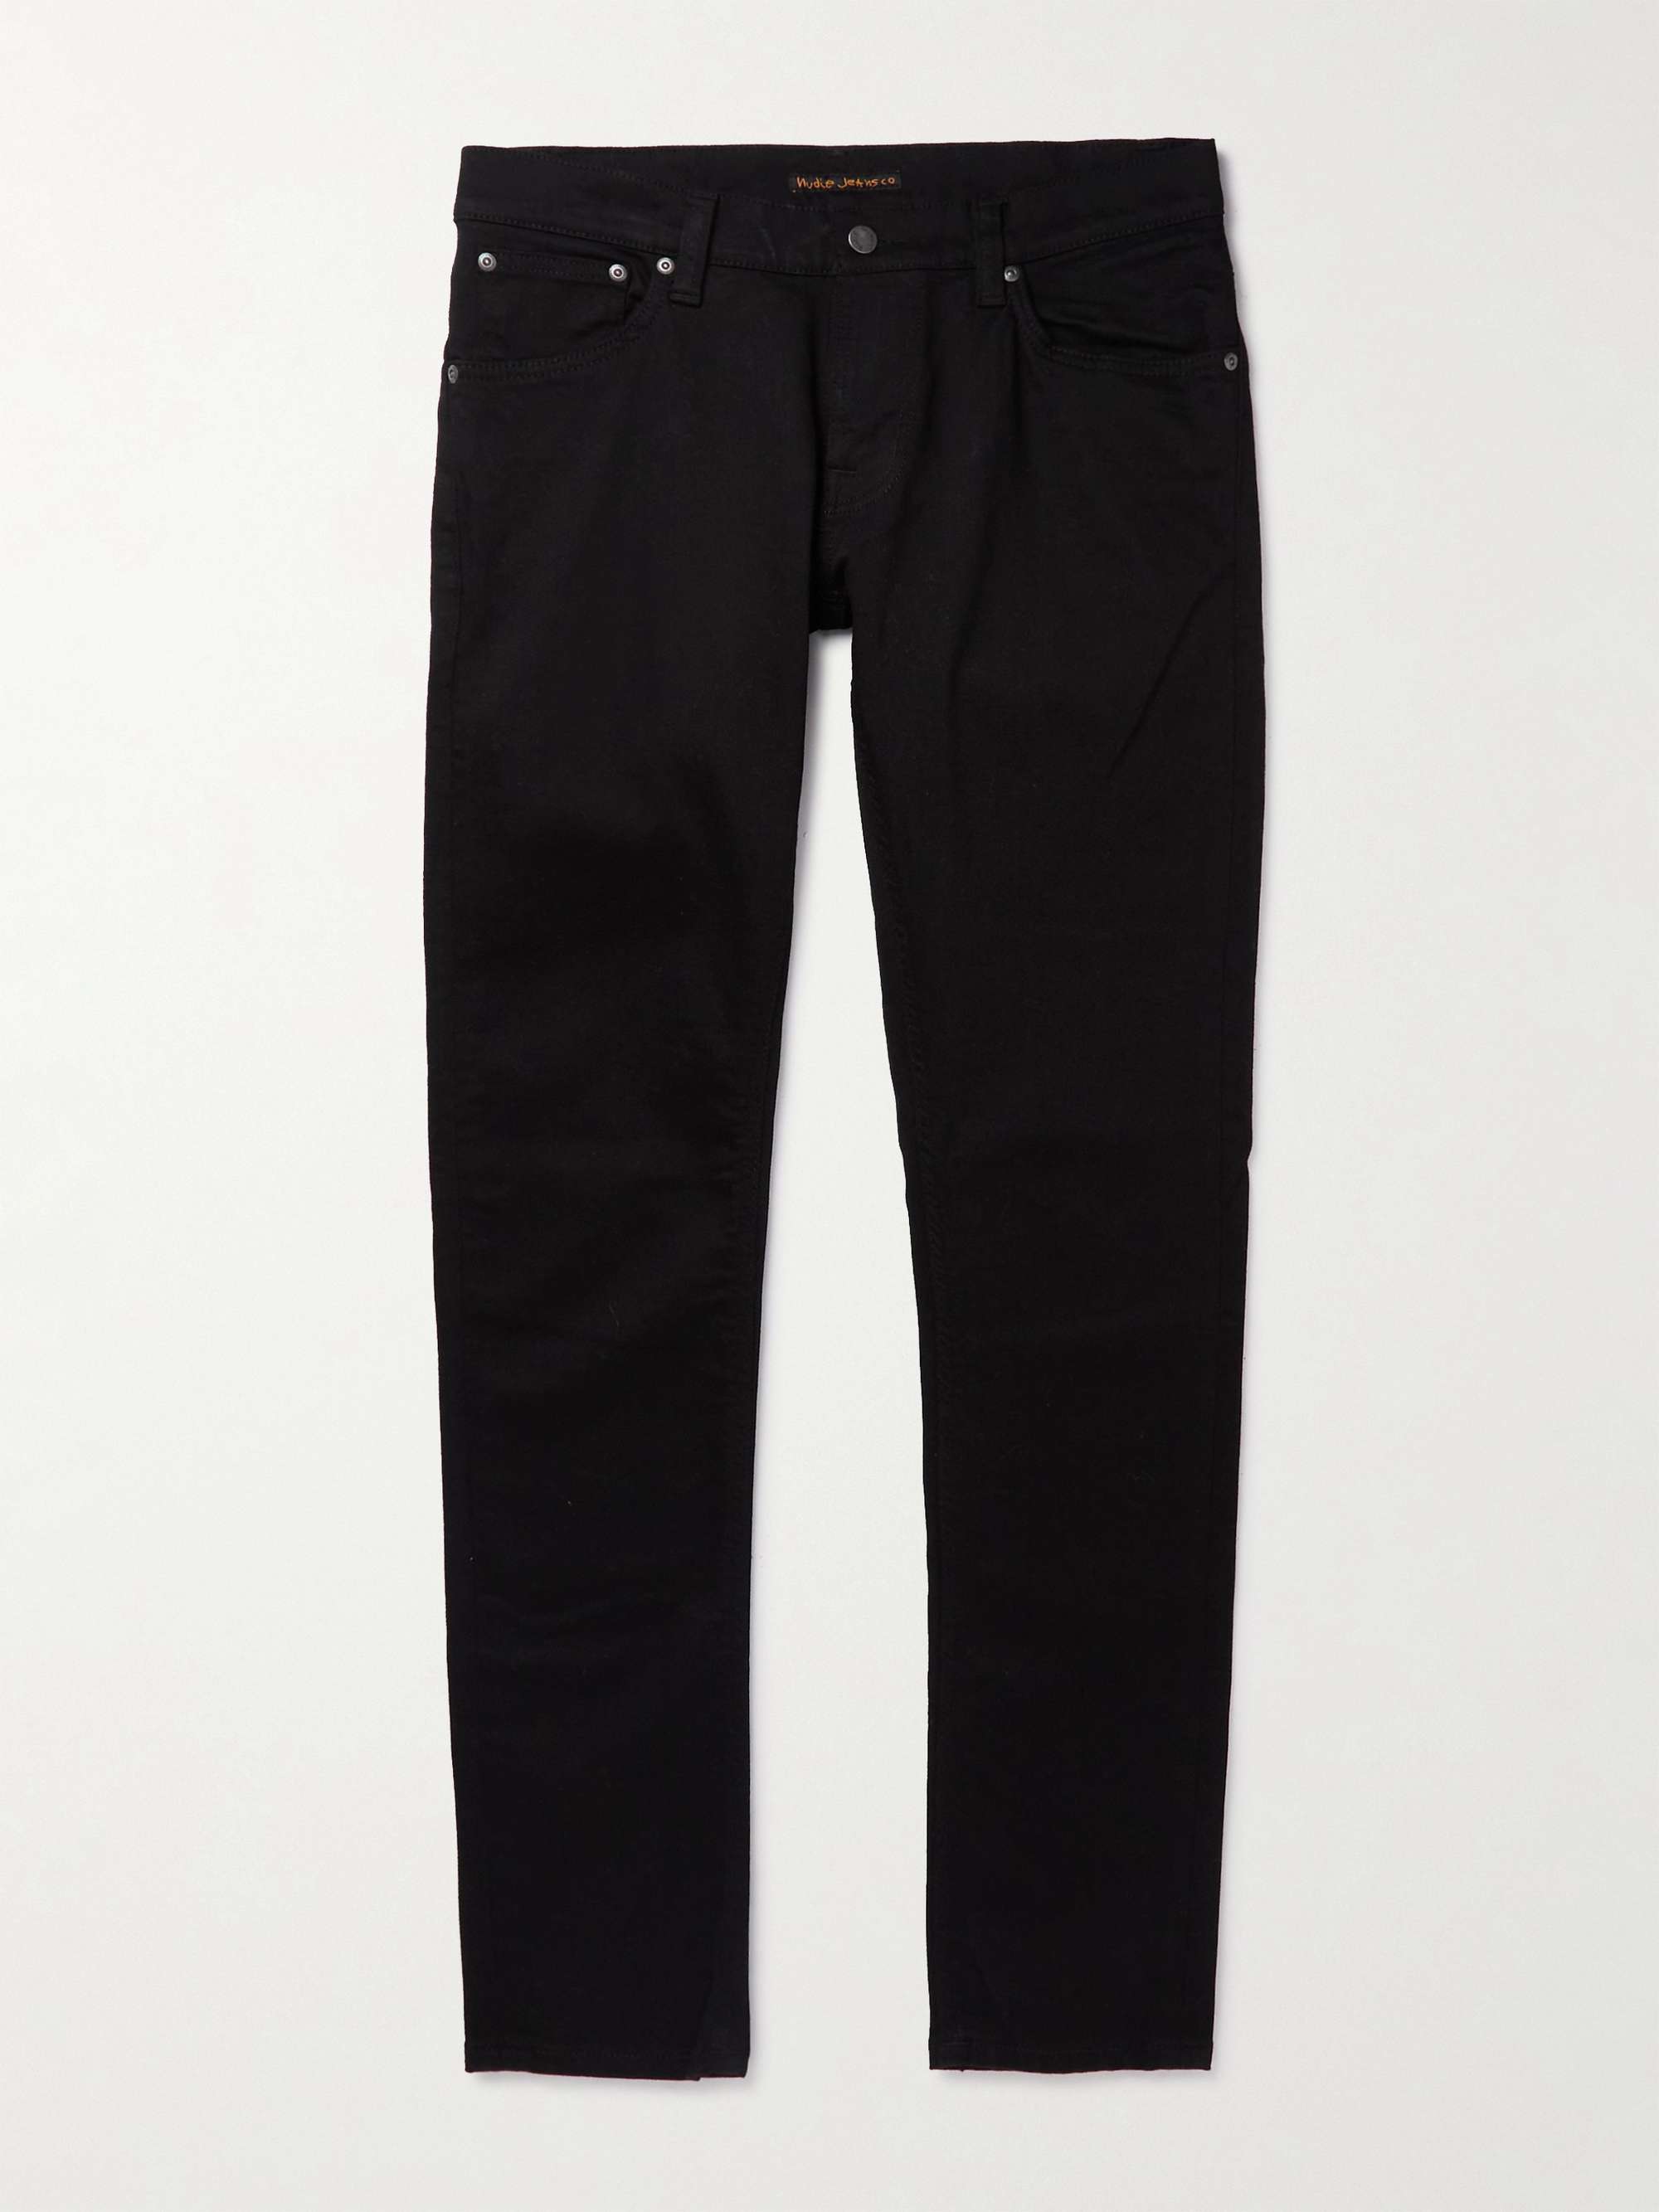 NUDIE JEANS Tight Terry Skinny-Fit Jeans | MR PORTER